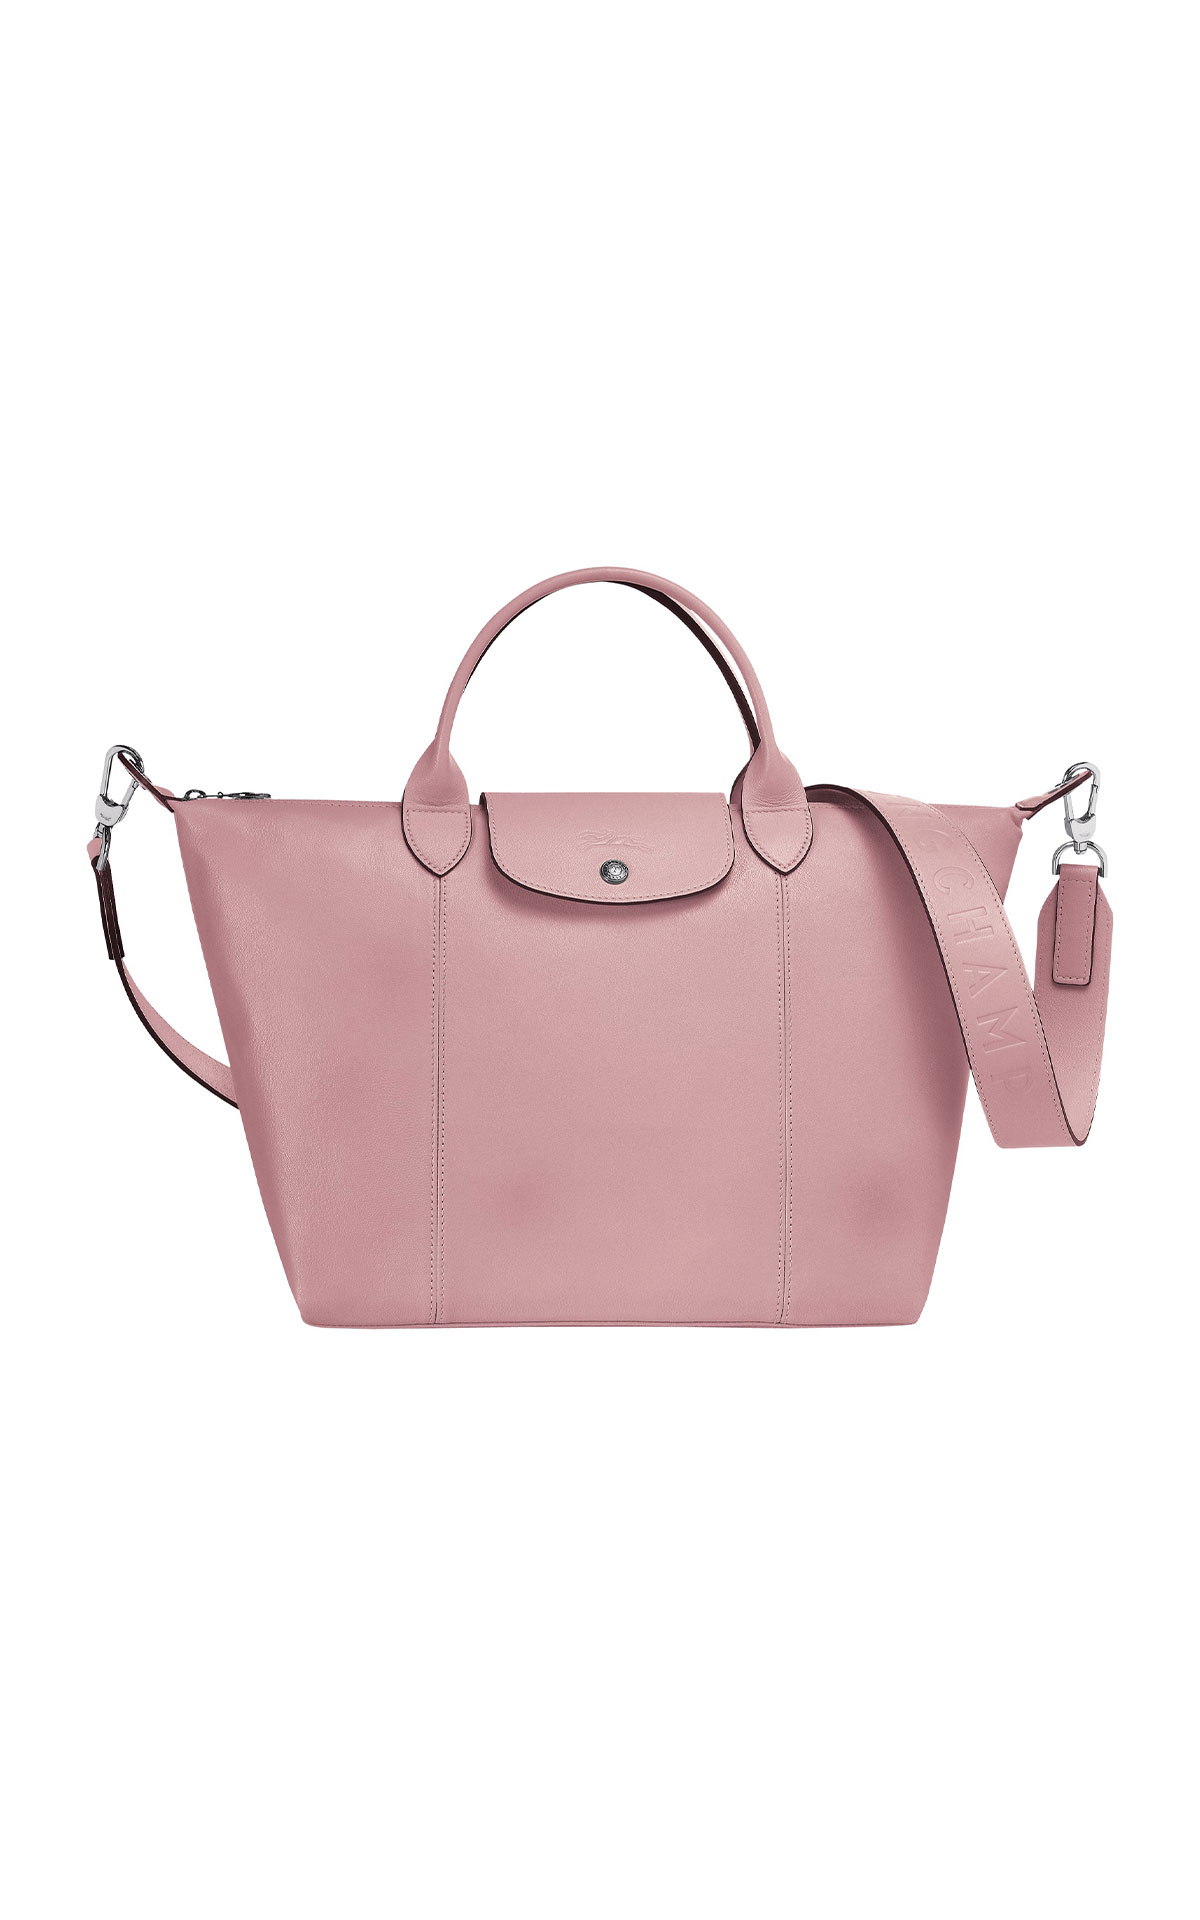 Longchamp Le pliage cuir medium pink bag with shoulder strap from Bicester Village